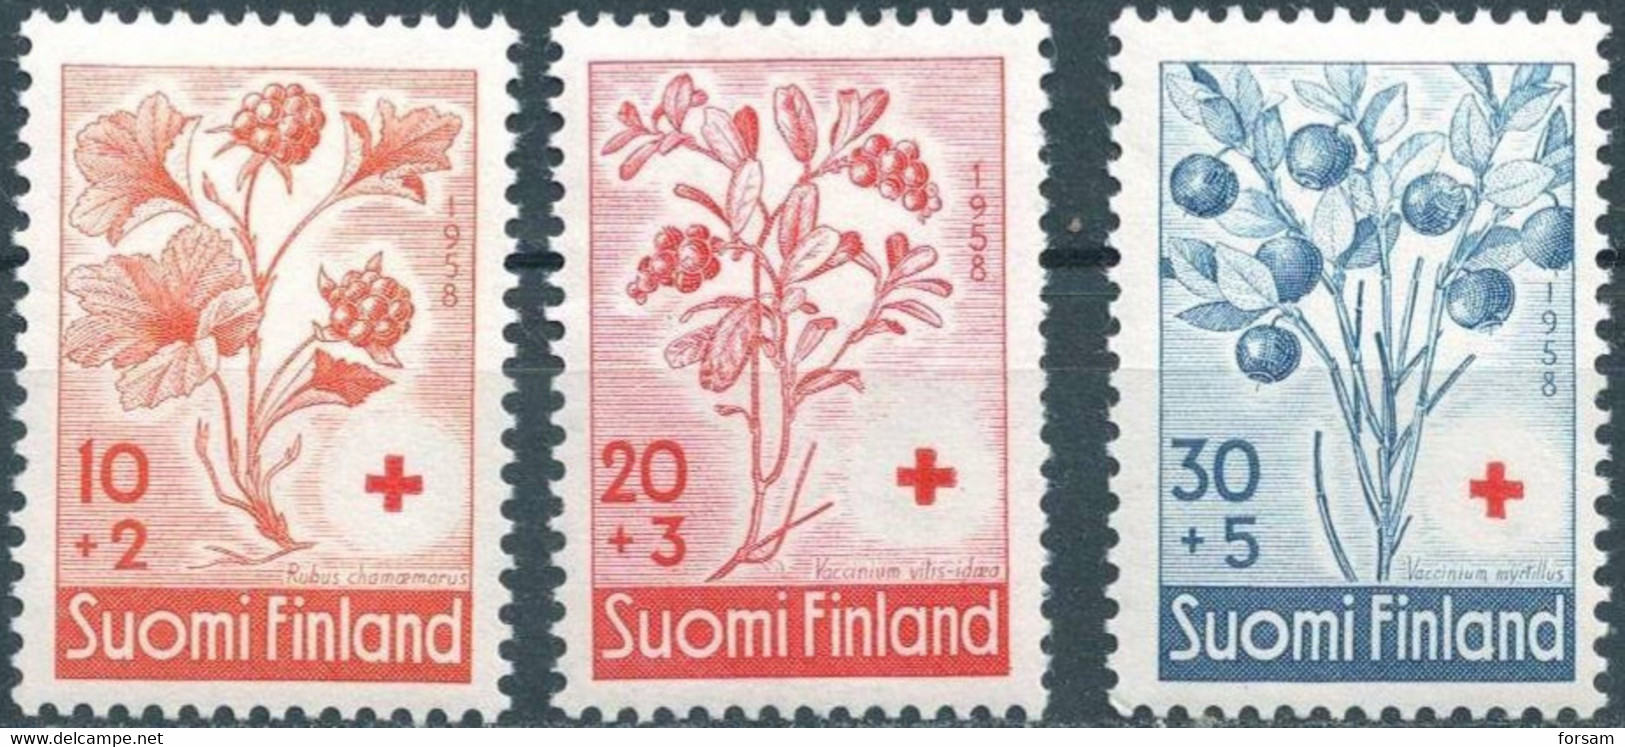 FINLAND..1958..Michel # 499-501...MLH. - Unused Stamps